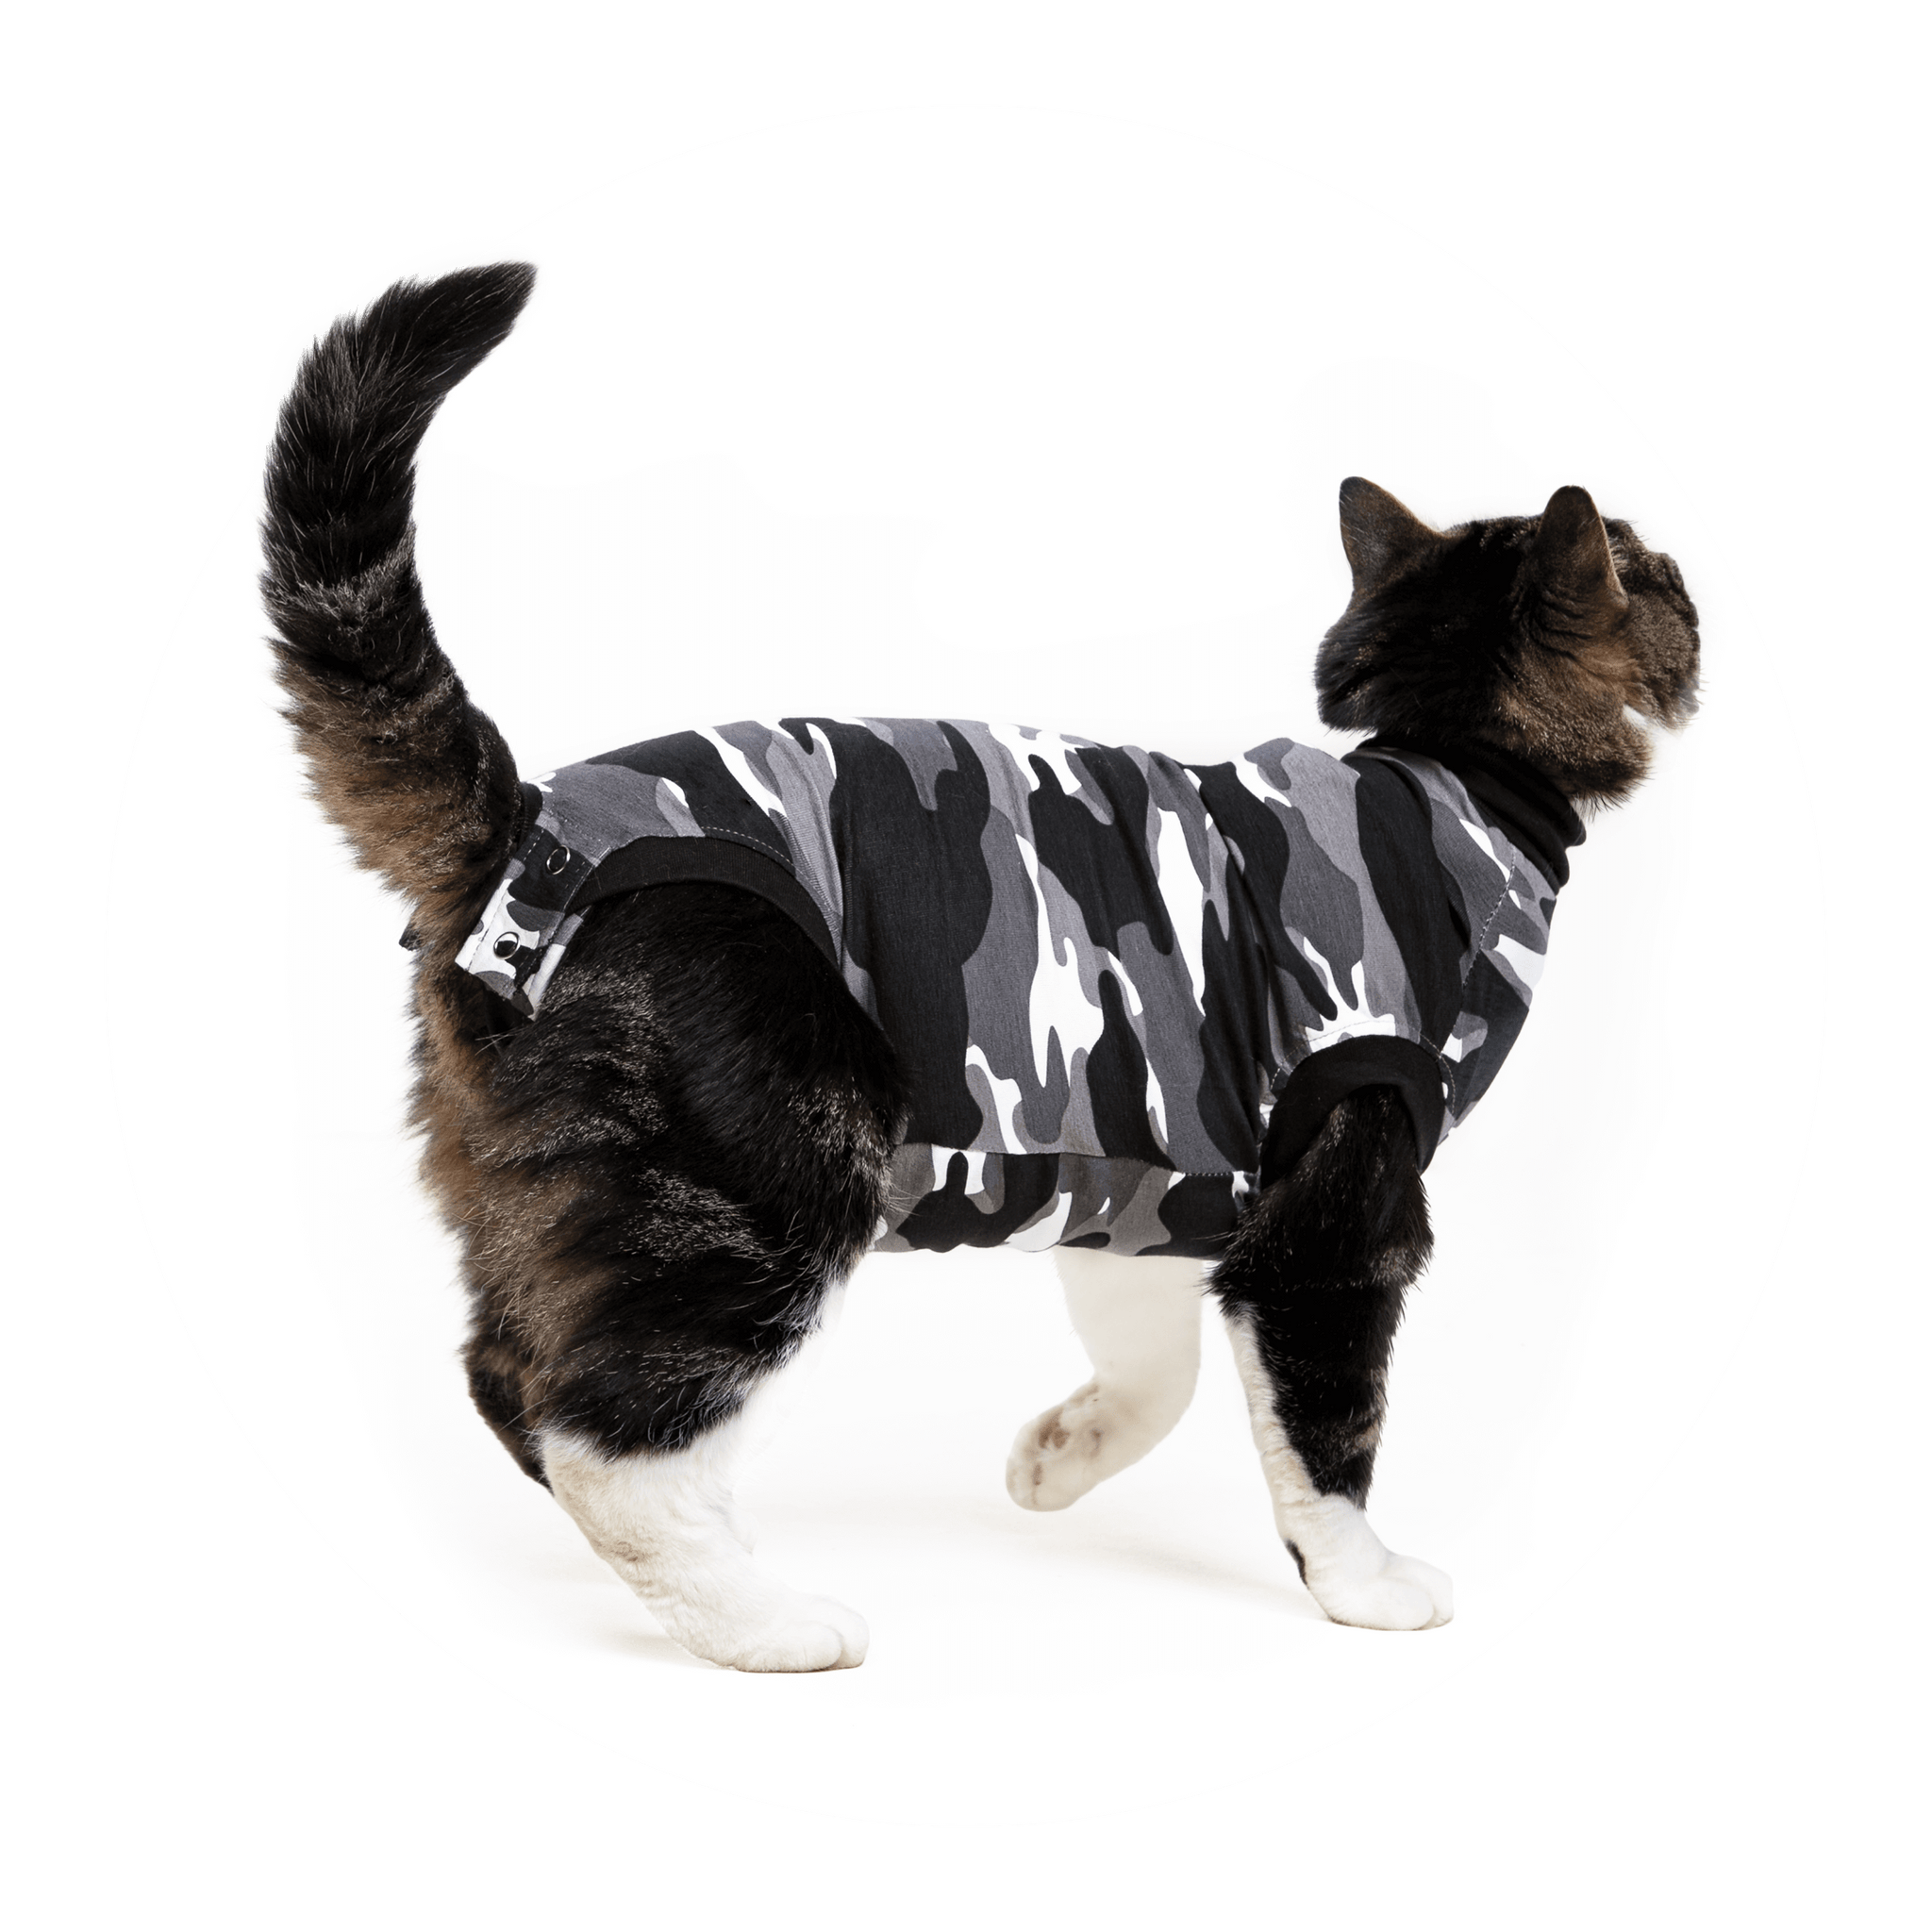 SUITICAL CAMOUFLAGE RECOVERY SUIT FOR CATS - Rosie Bunny Bean